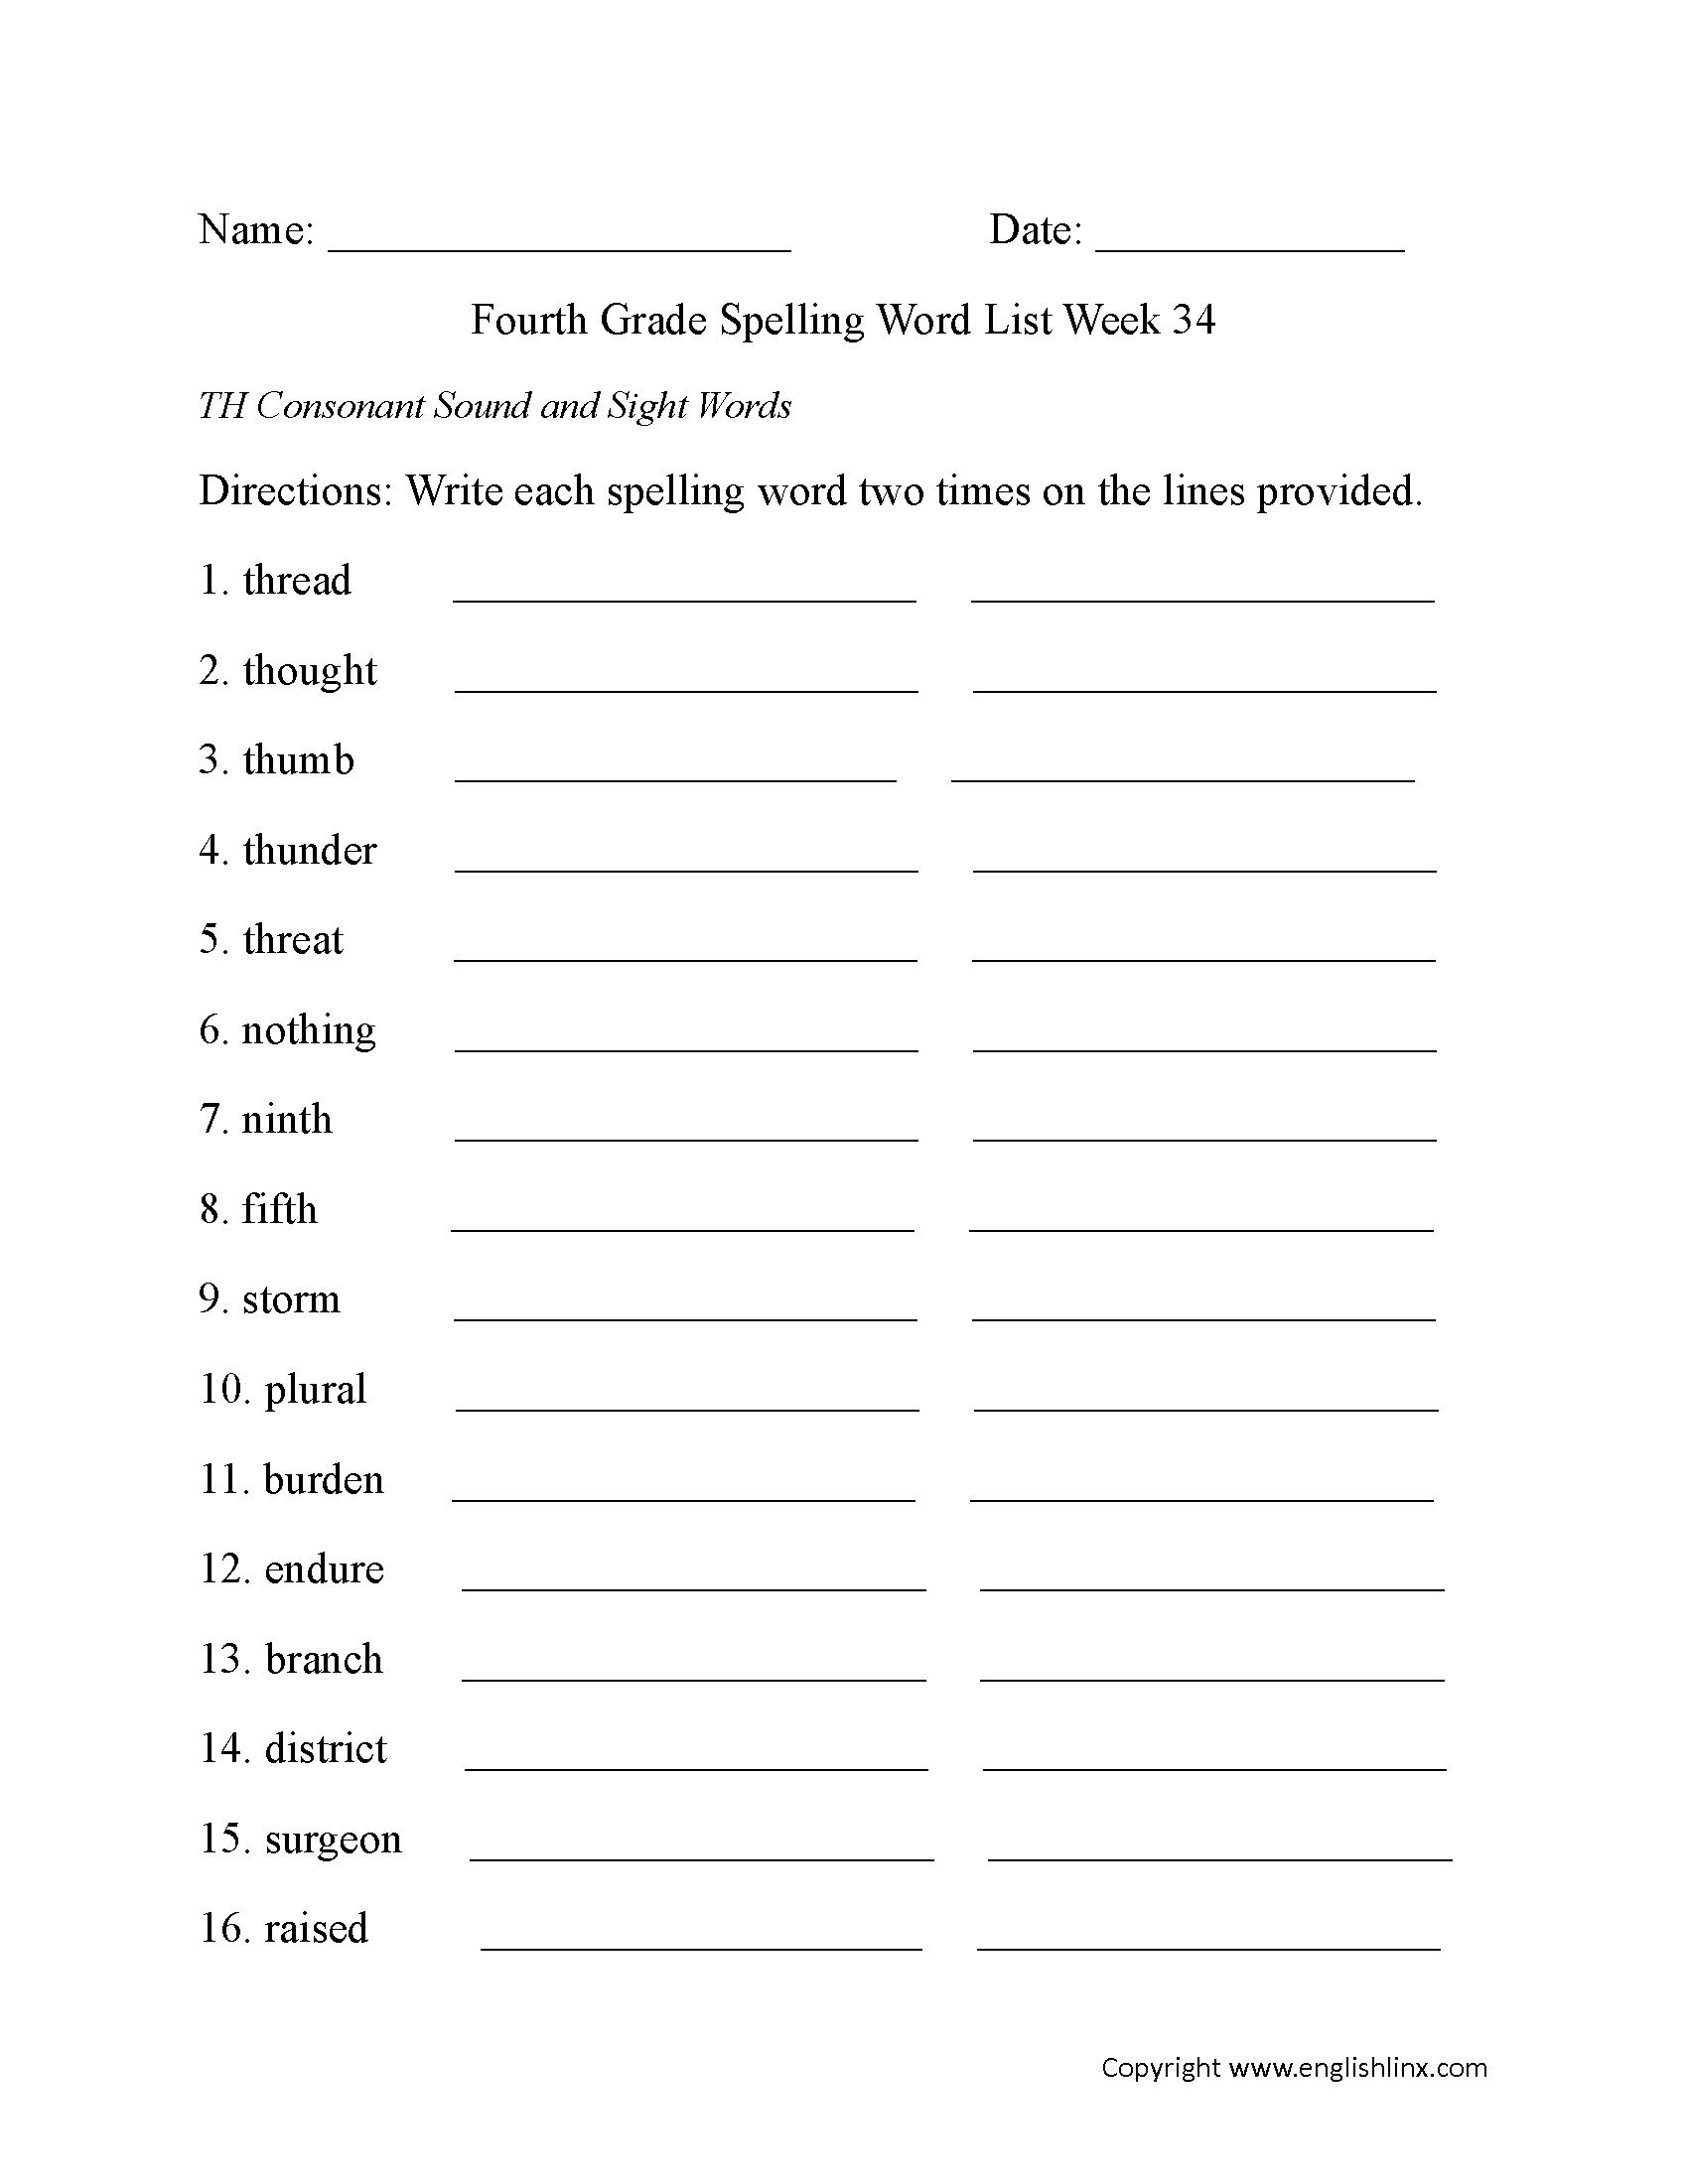 Week 34 TH Consonant and Sight Words Fourth Grade Spelling Words Worksheets